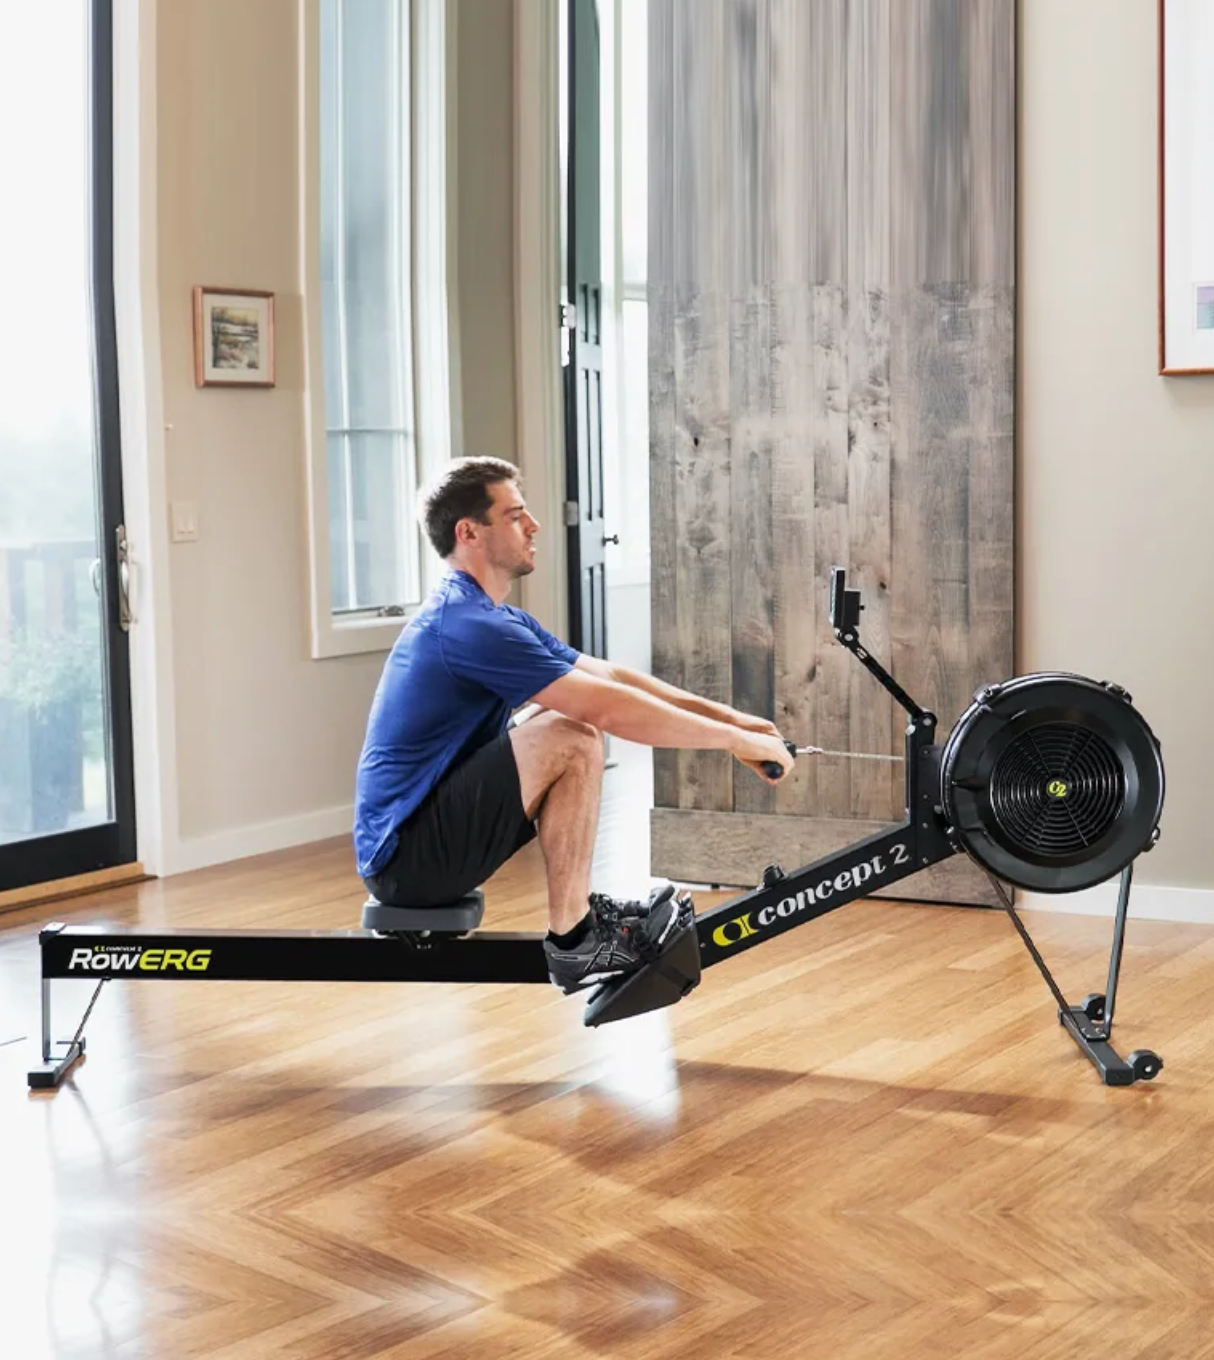 Concept 2 Indoor Rower Model D with PM5 Monitor | Black